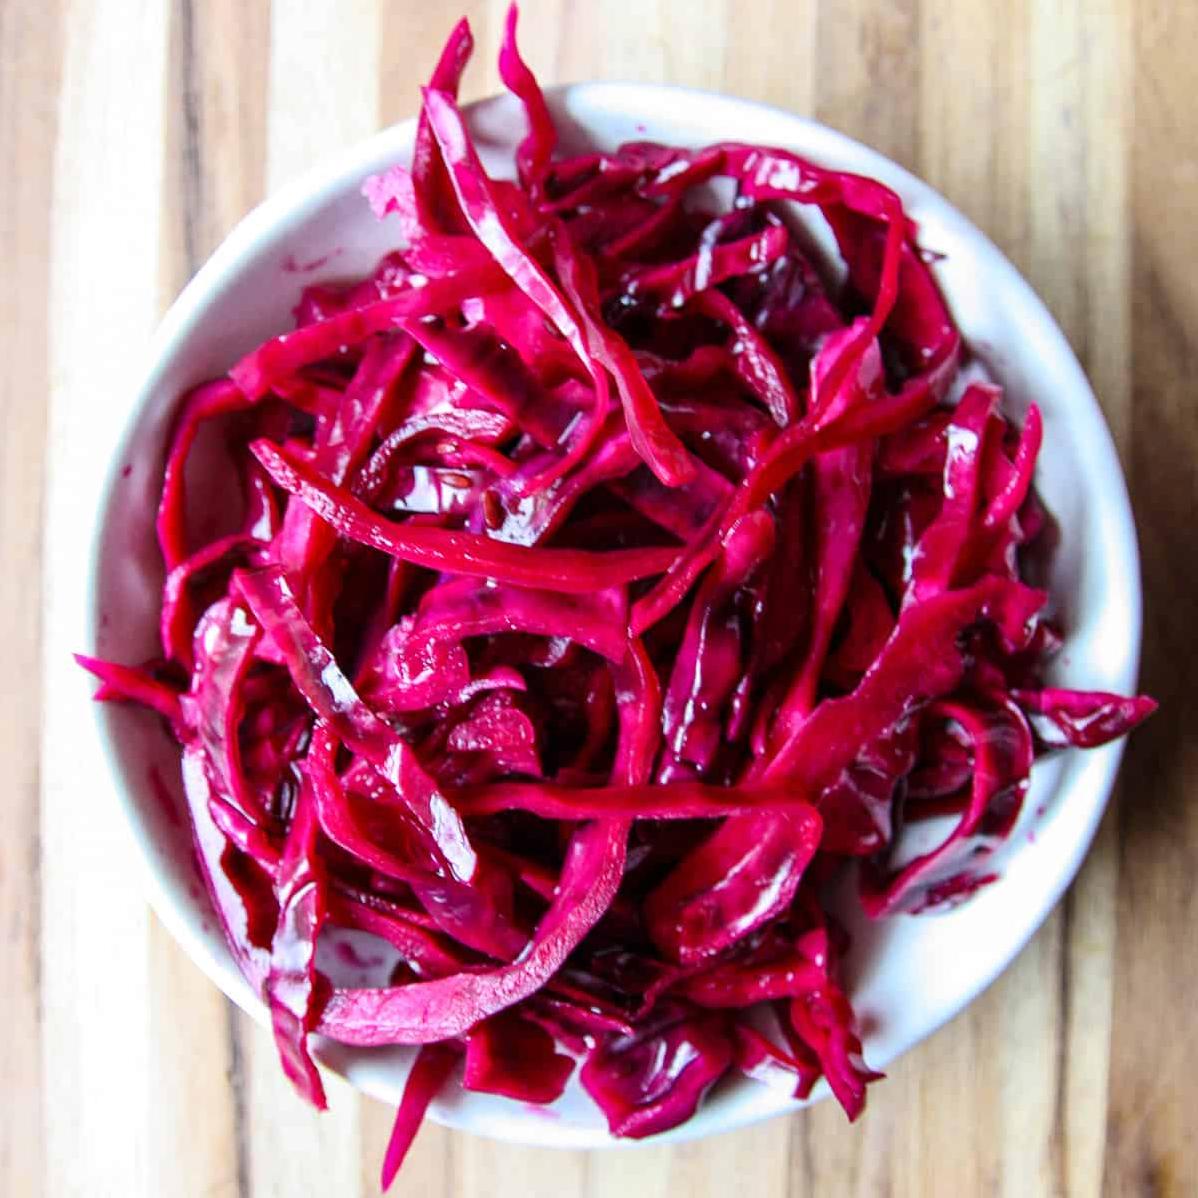  The perfect side dish for any meal, this pickled red cabbage is a star all on its own.